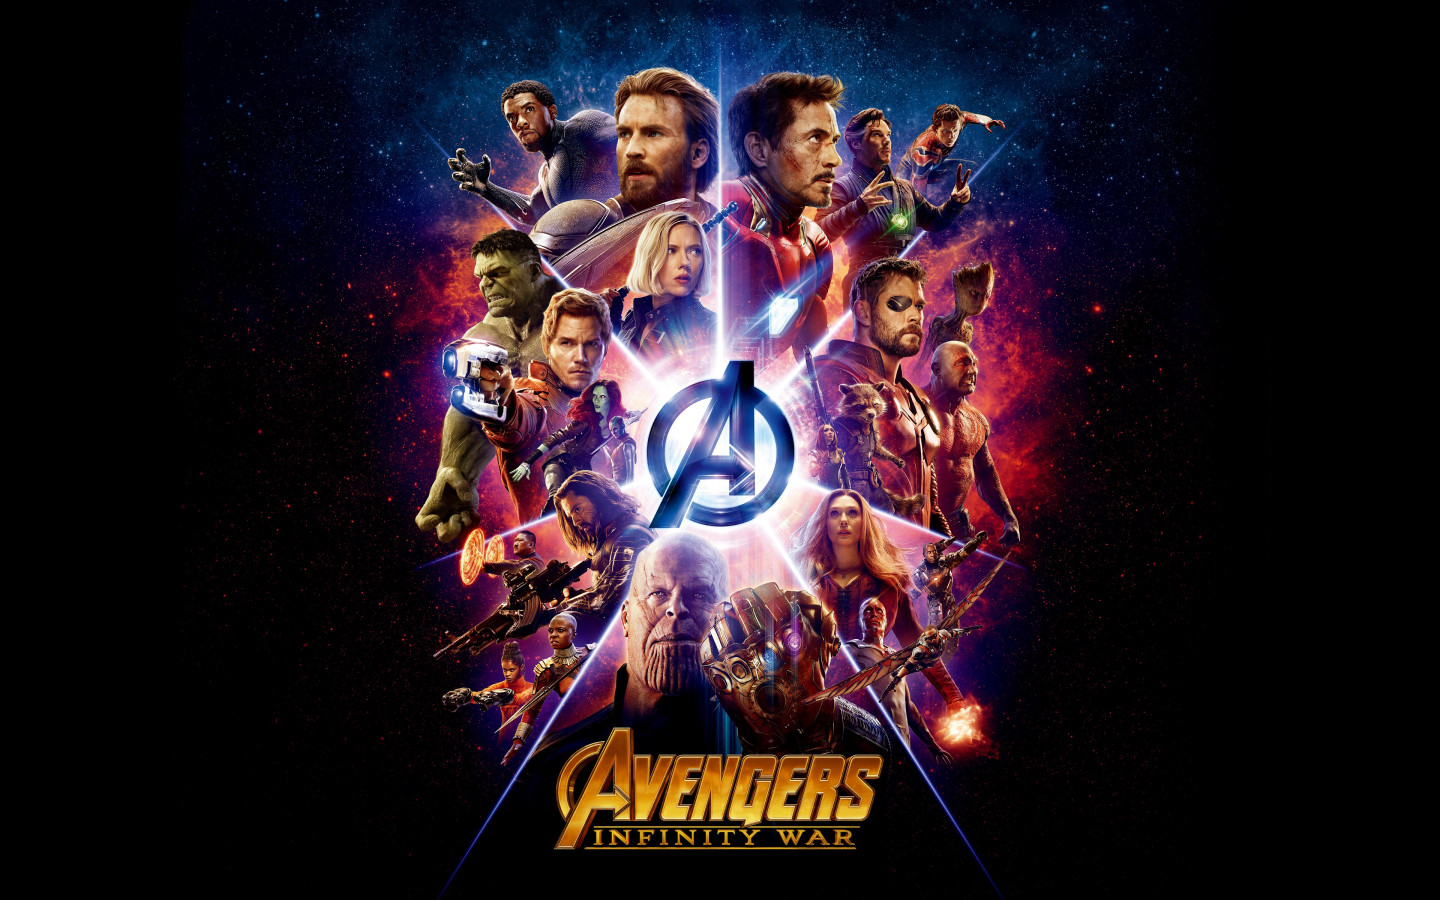 All the heroes from Avengers: Infinity War wallpaper 1440x900